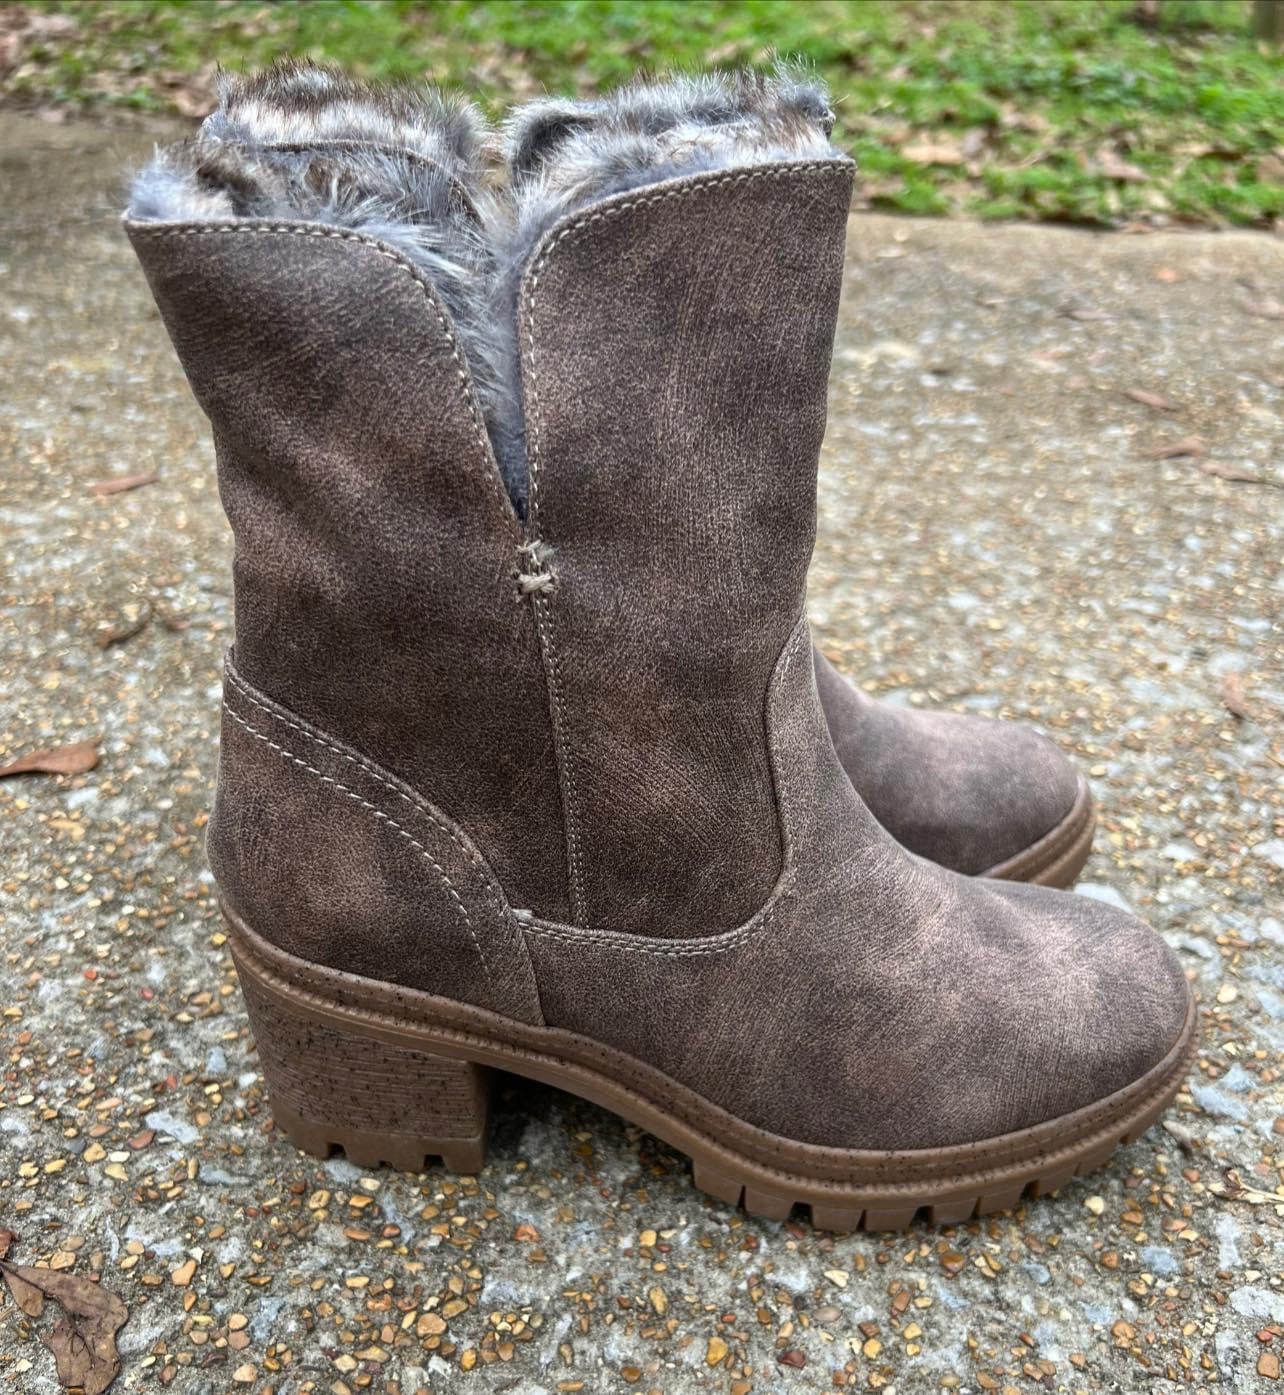 Very G taupe “North Park” boots